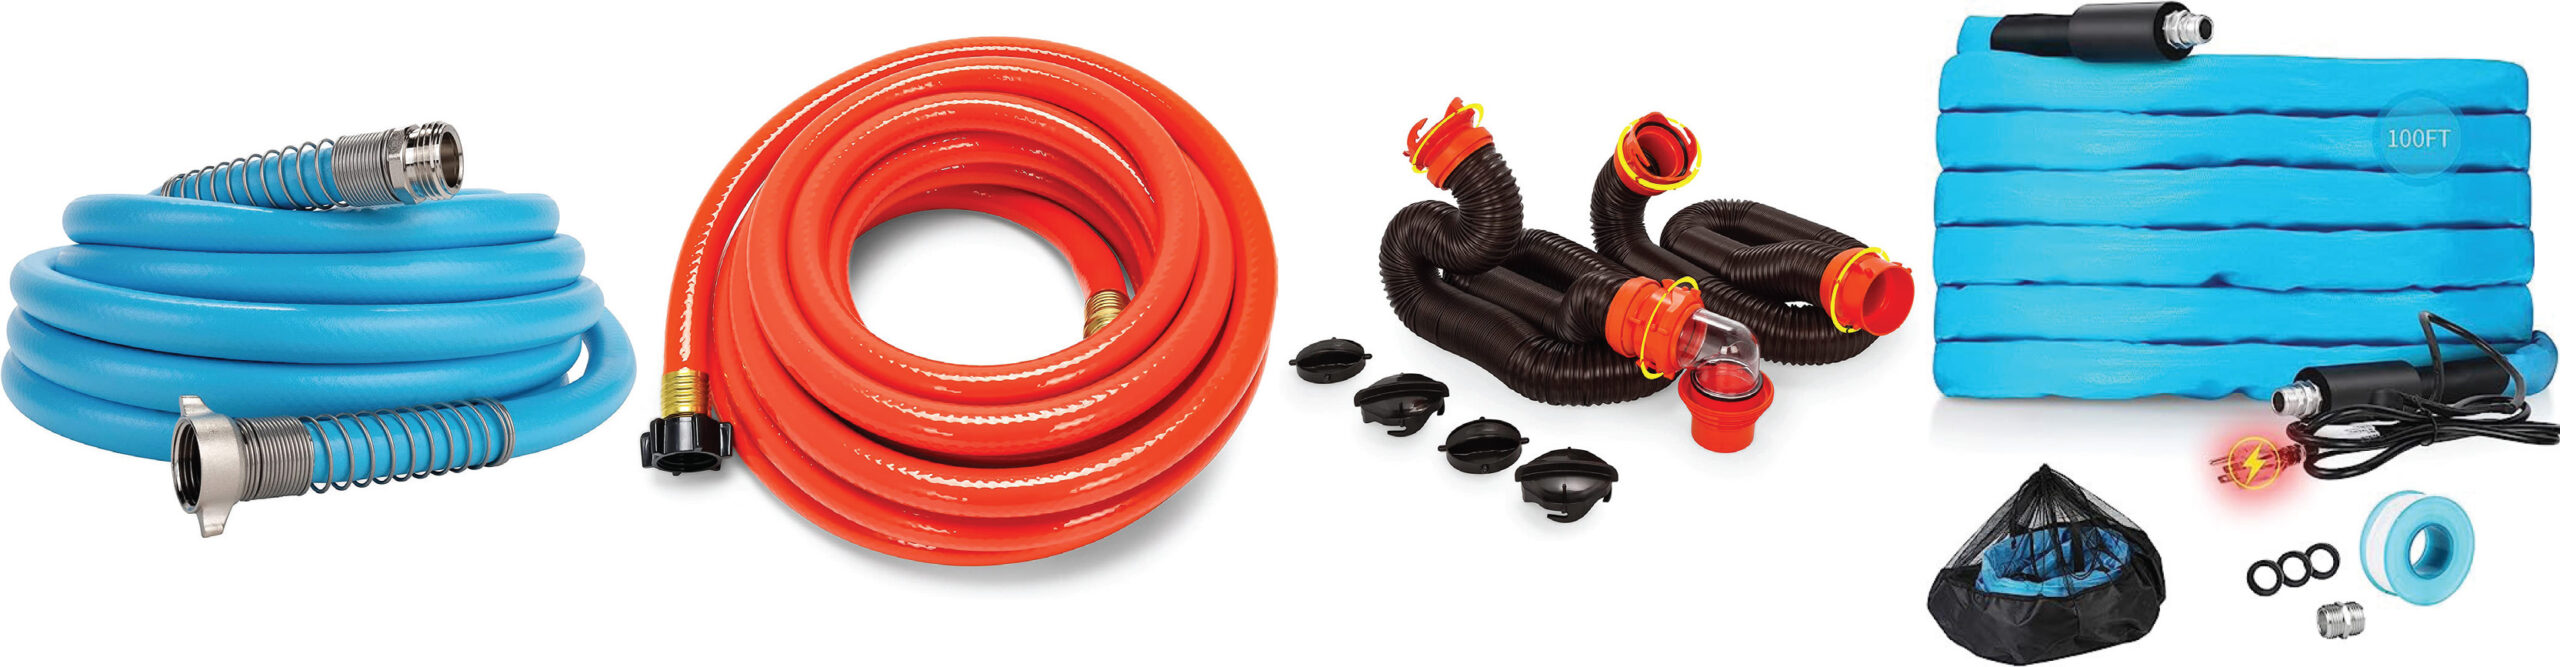 Essentials for Full-Time RV Living: fresh water hose, grey water hose, sewage hose, heated water hose